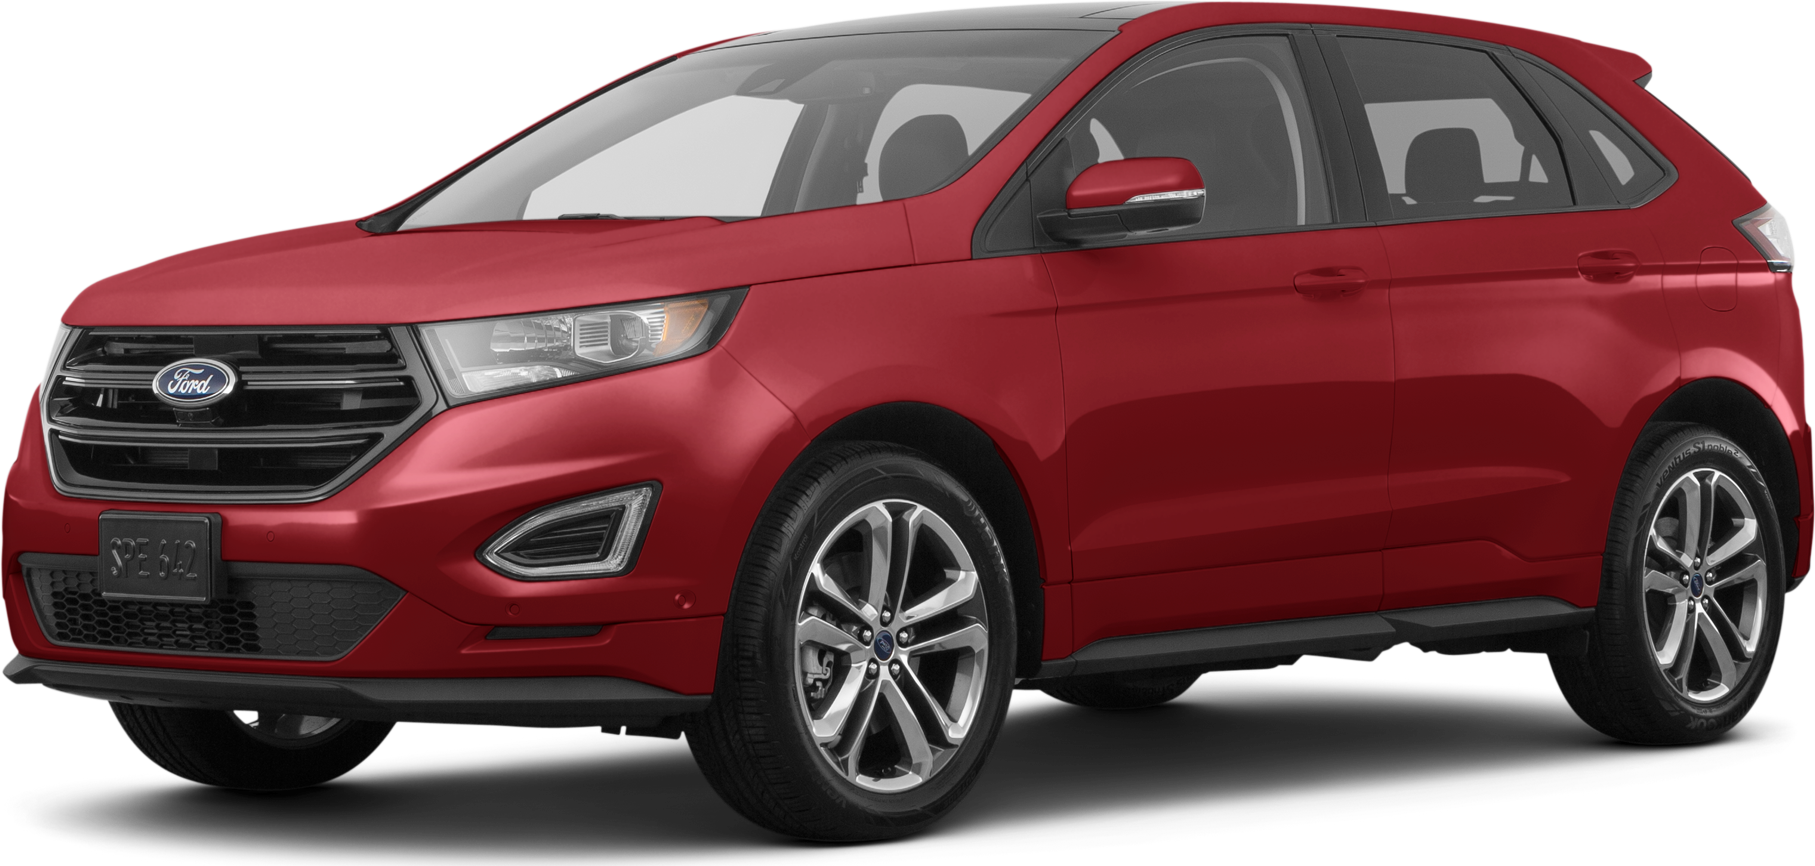 2017 Ford Edge Sport Review: The power to corrupt